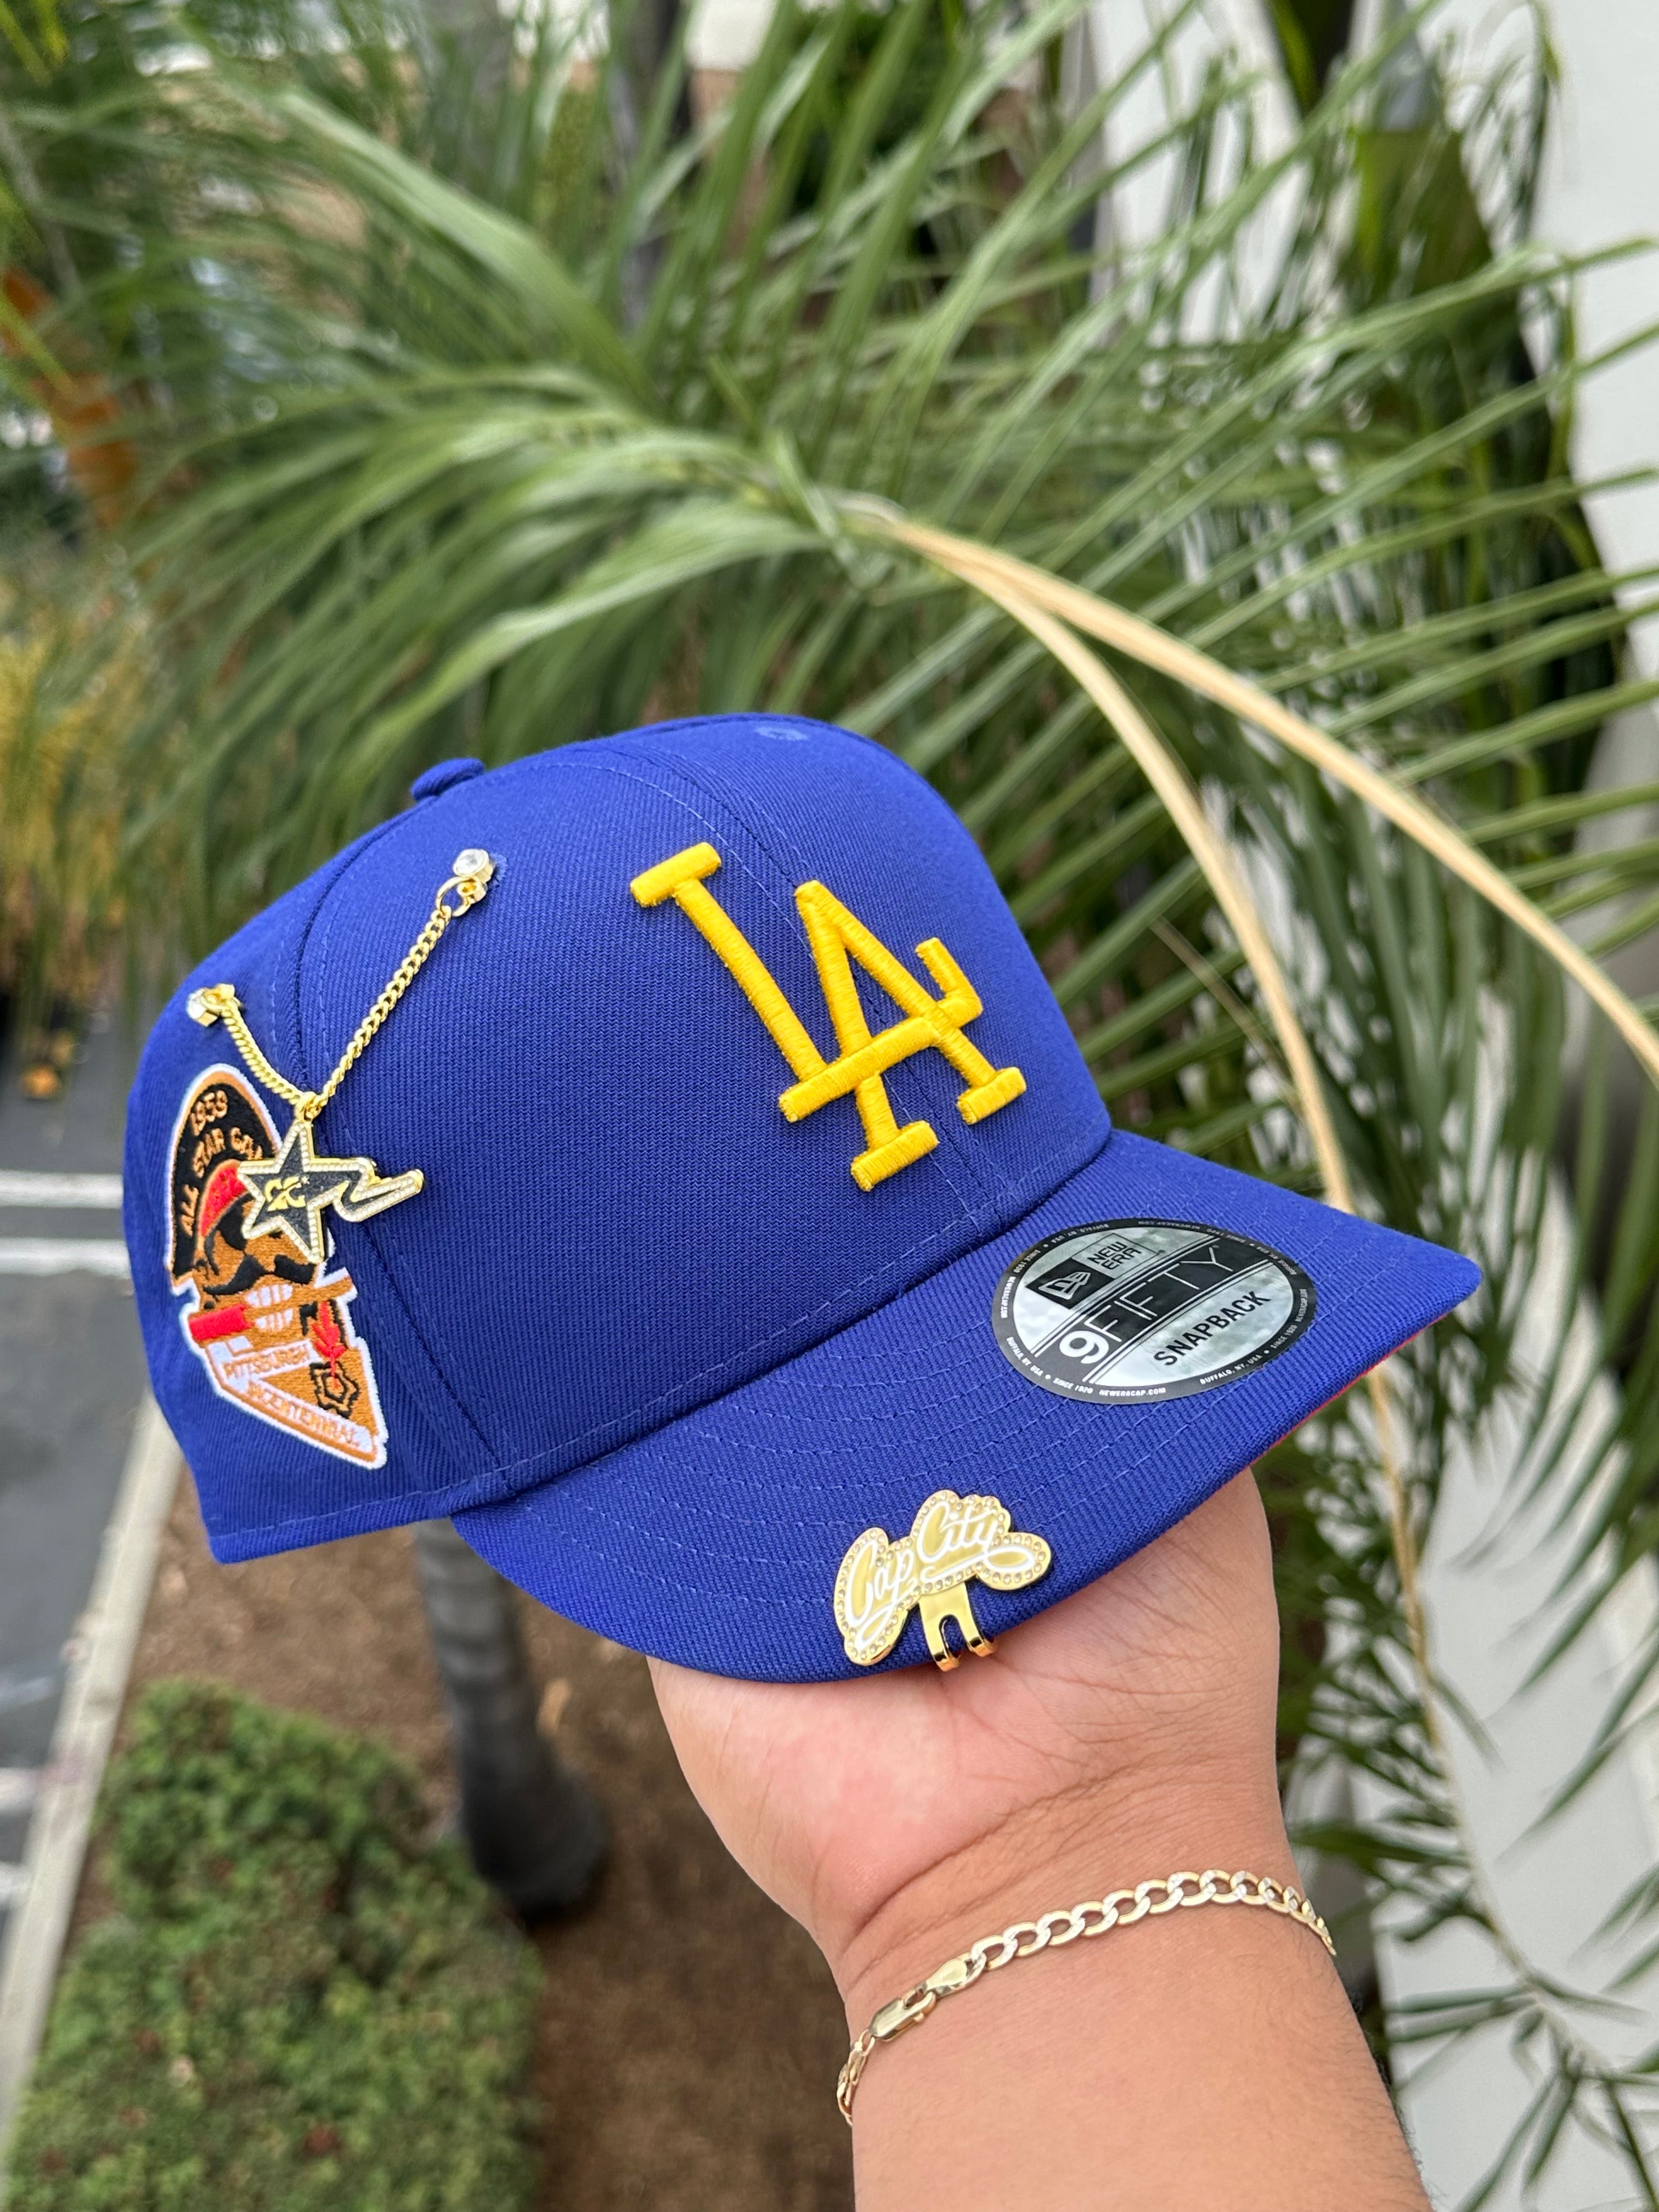 NEW ERA EXCLUSIVE 9FIFTY BLUE LOS ANGELES DODGERS SNAPBACK W/ 1959 ALL STAR GAME PATCH